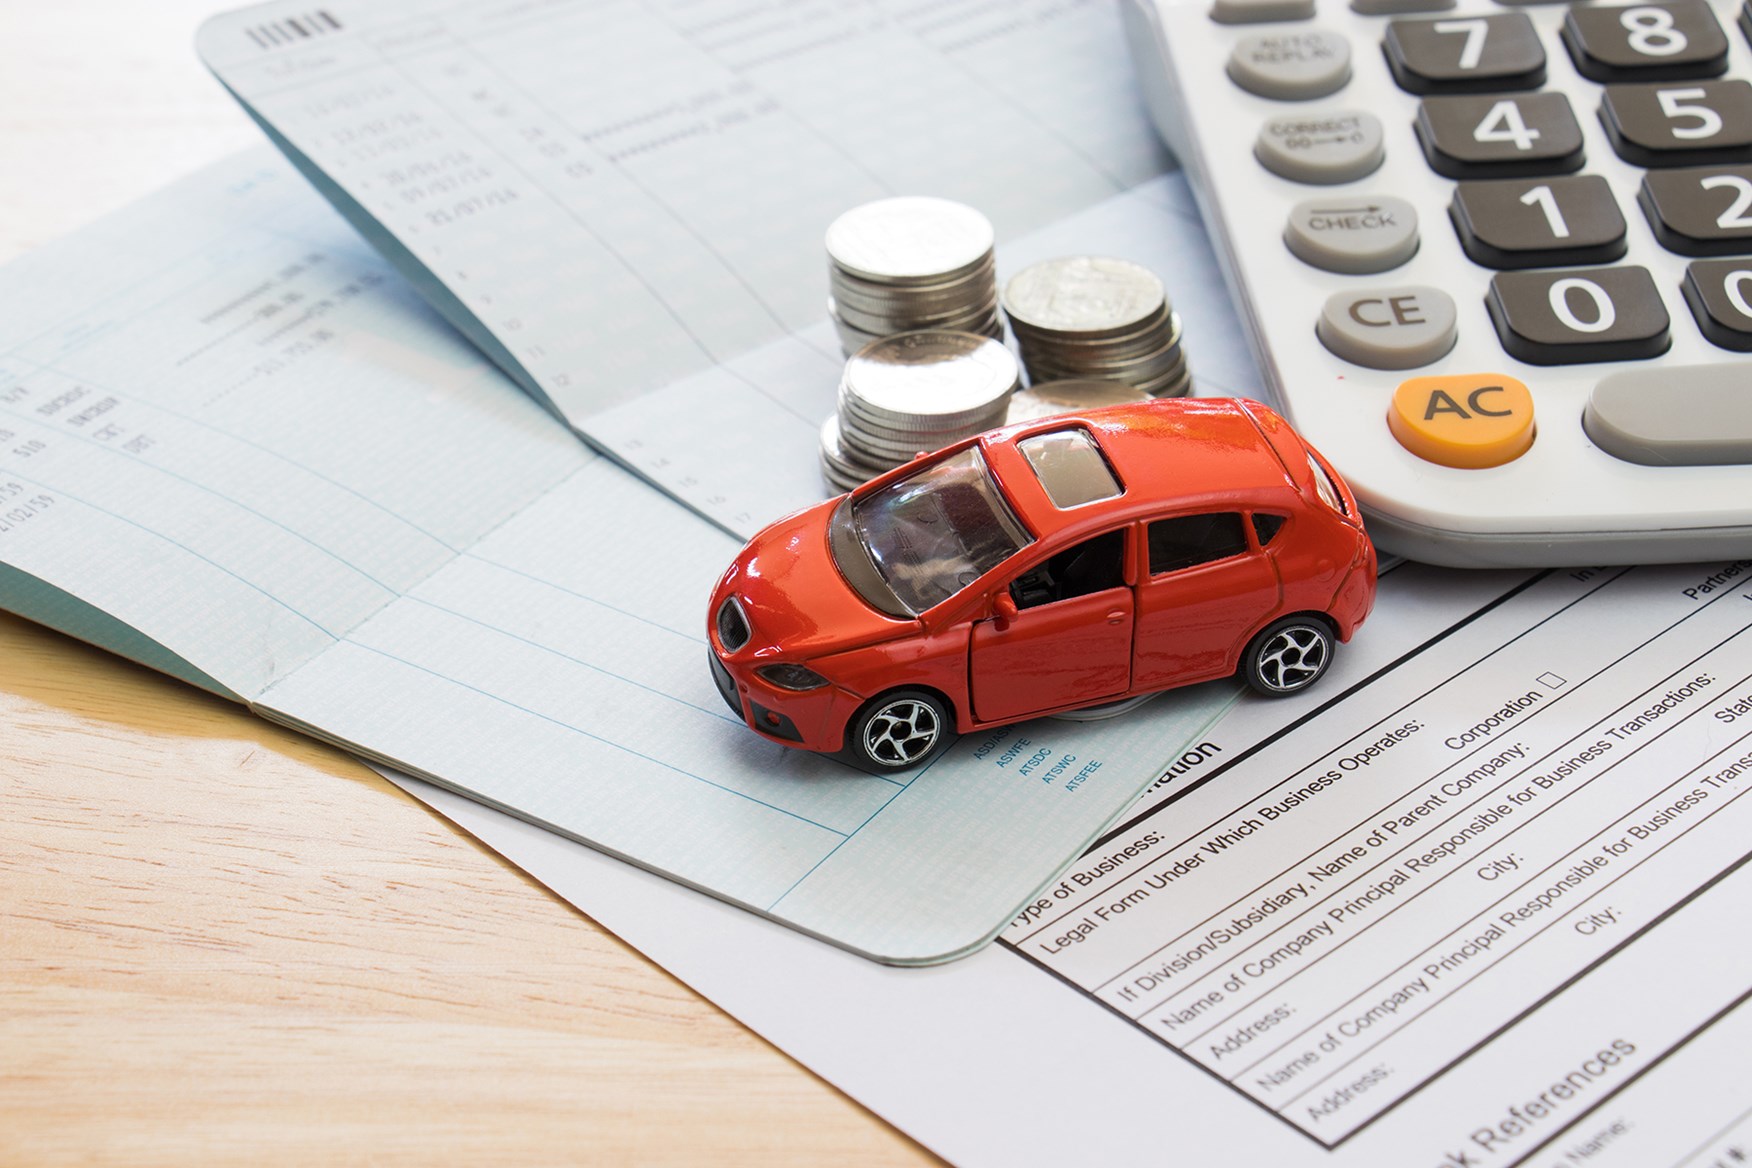 Car road tax: your guide to Vehicle Excise Duty (VED) | Parkers